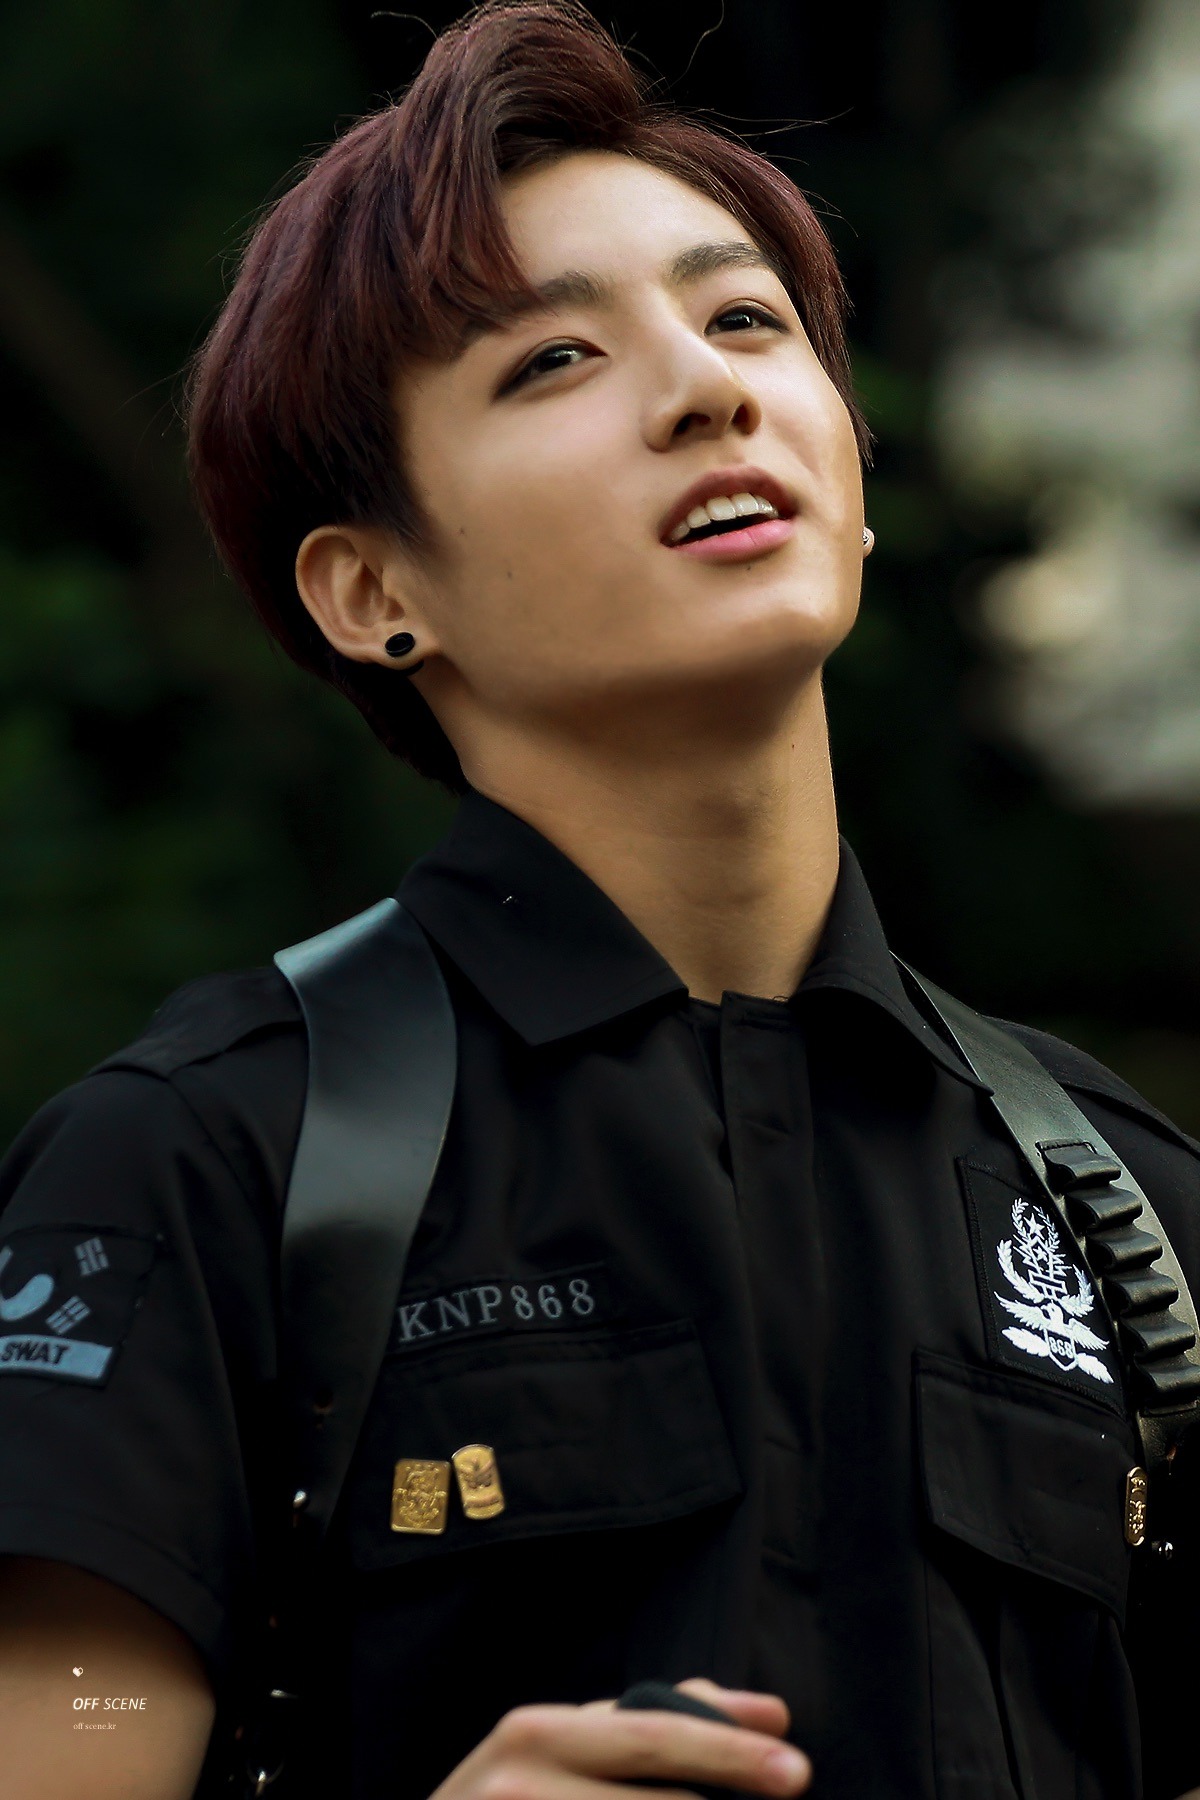 Quick! Post your favorite picture/video of Jungkook! : bangtan